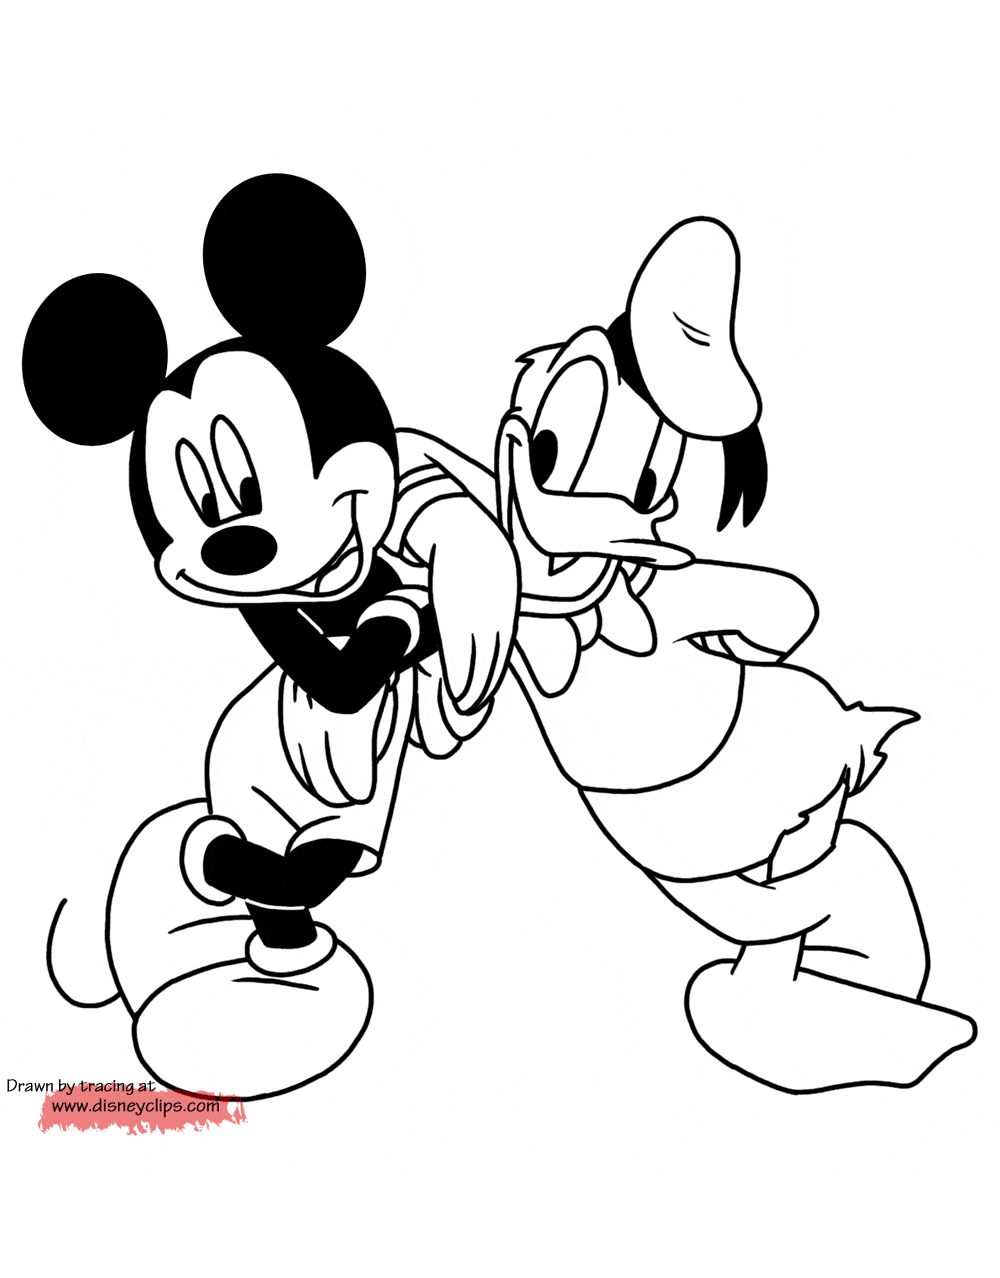 mickey and friends coloring pages mickey mouse friends coloring pages 8 disney39s world coloring and pages friends mickey 